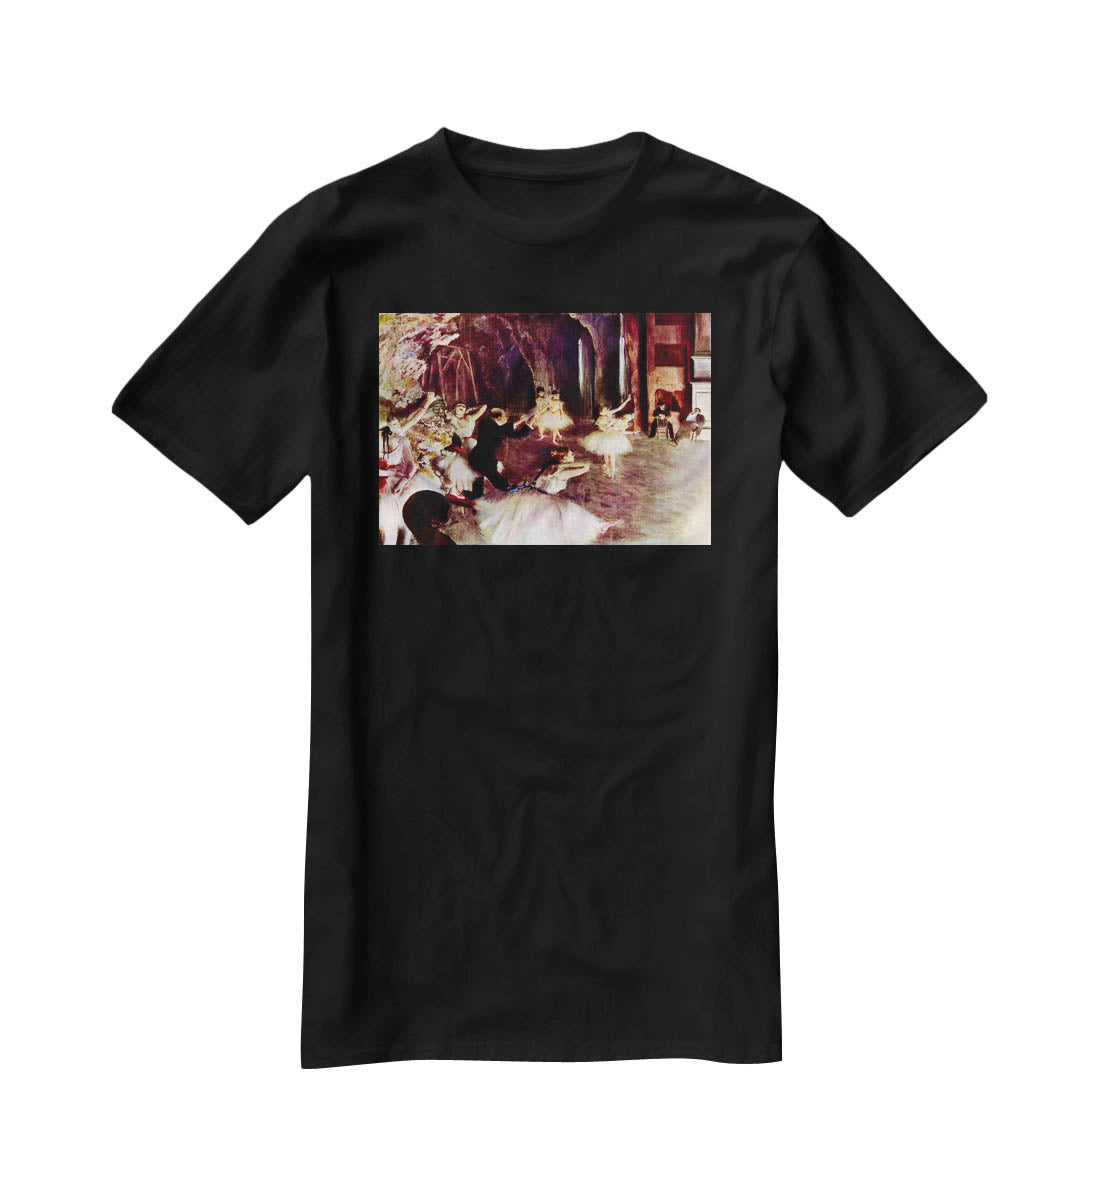 Stage trial by Degas T-Shirt - Canvas Art Rocks - 1